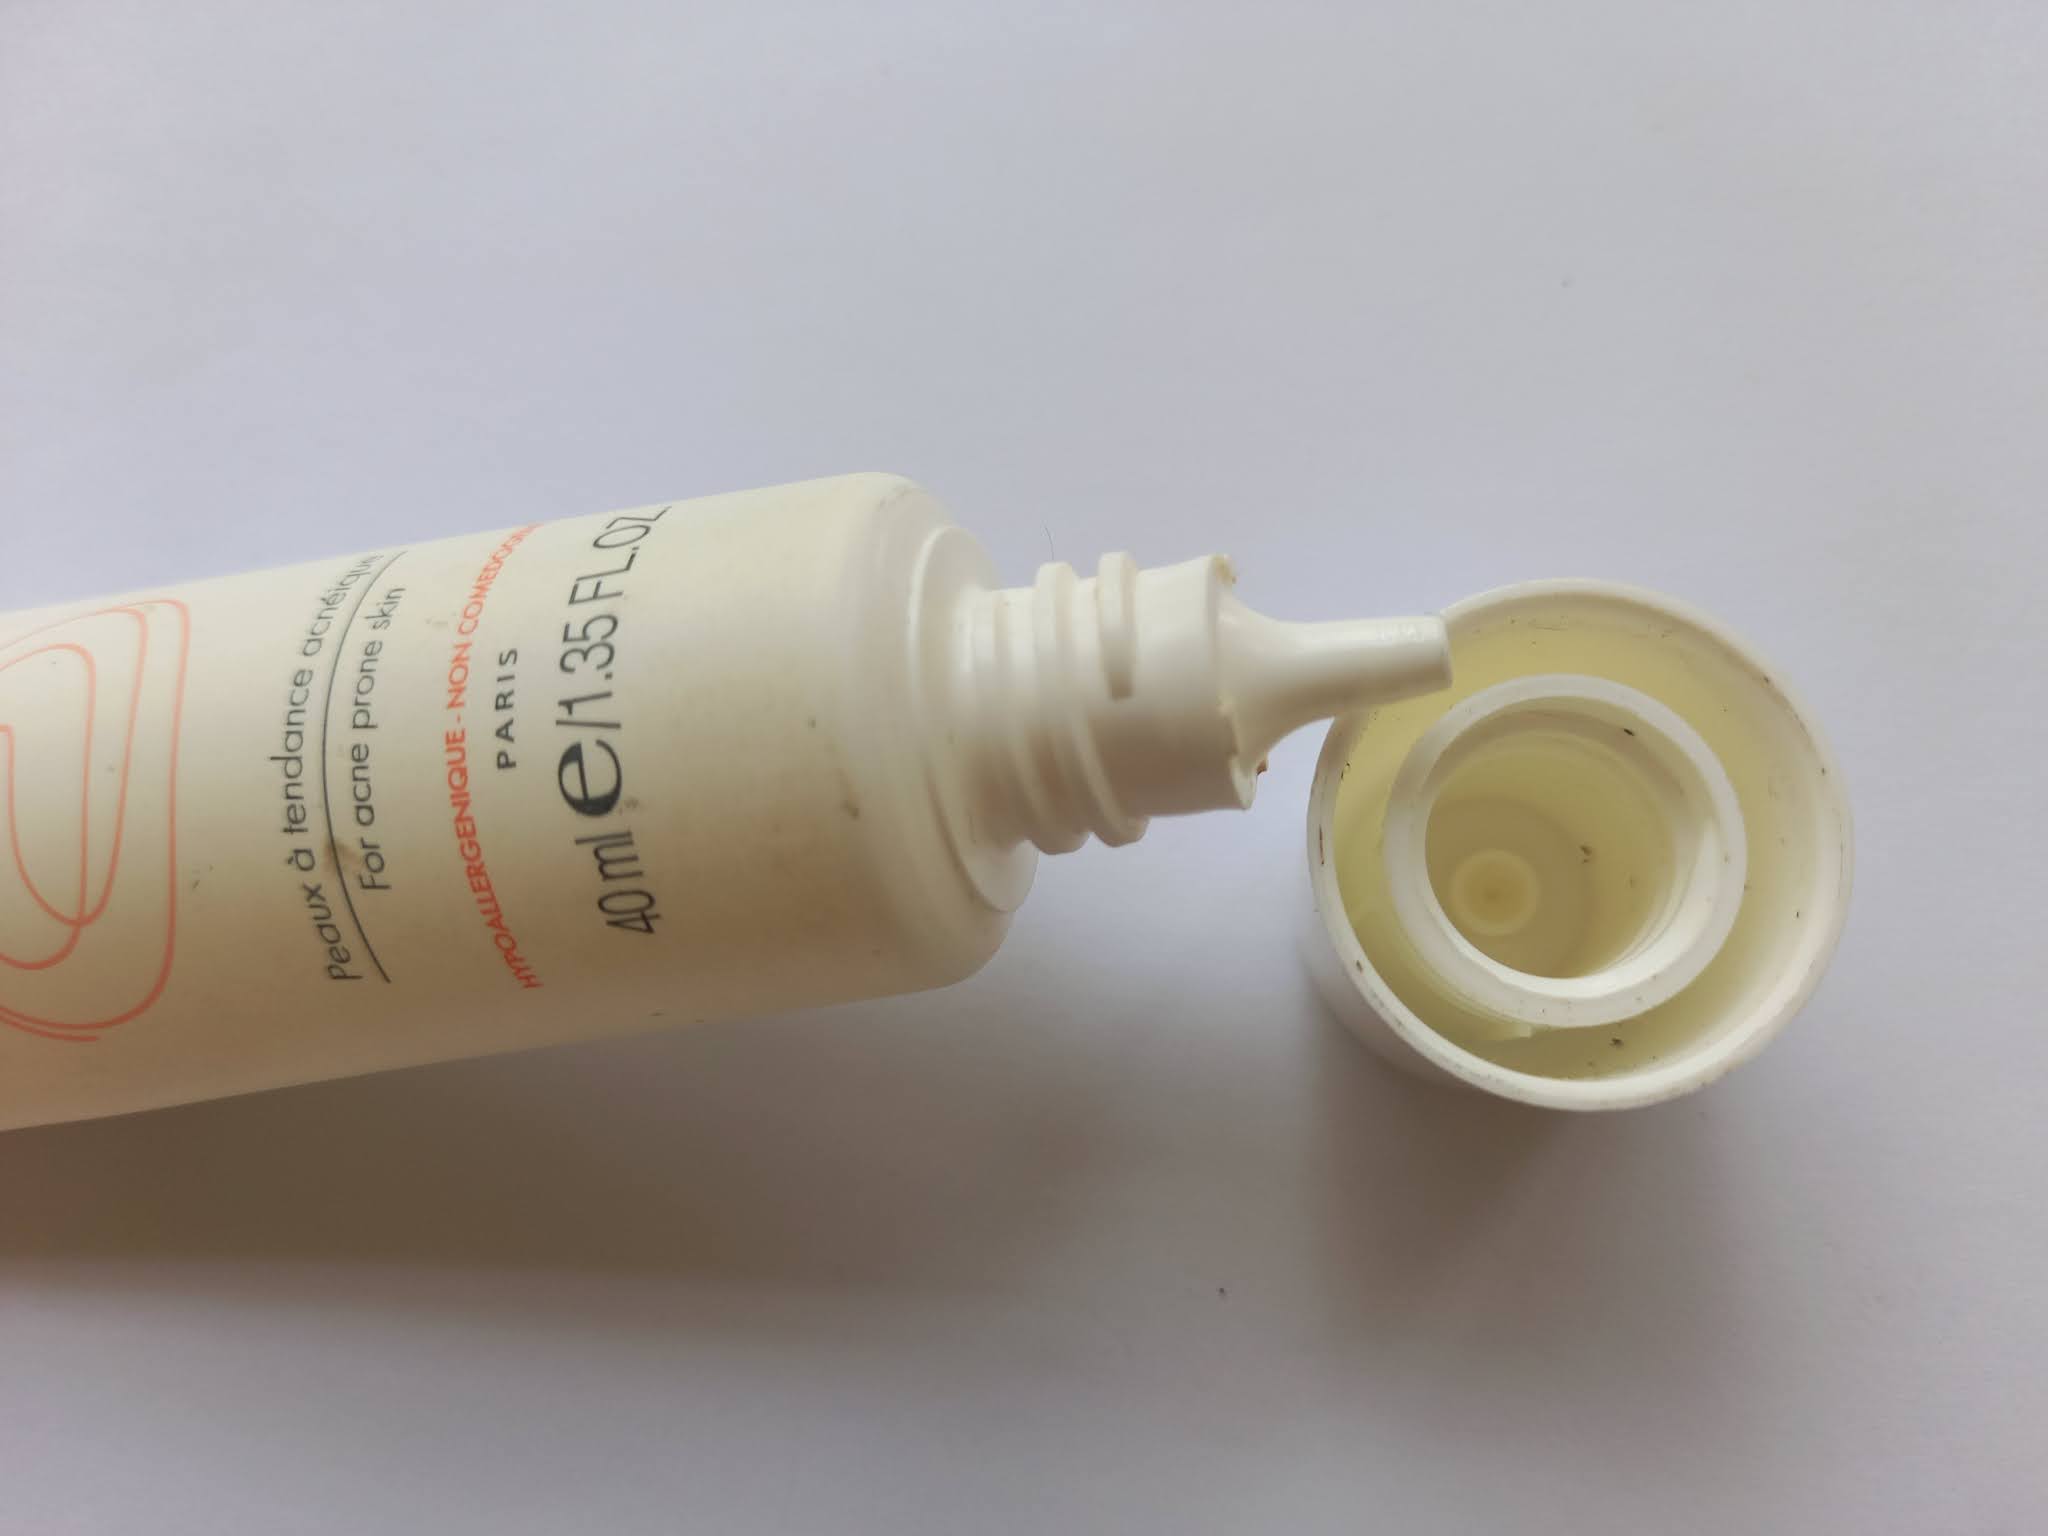 Eau Thermale Avene Cleanance EXPERT Lotion for acne prone skin